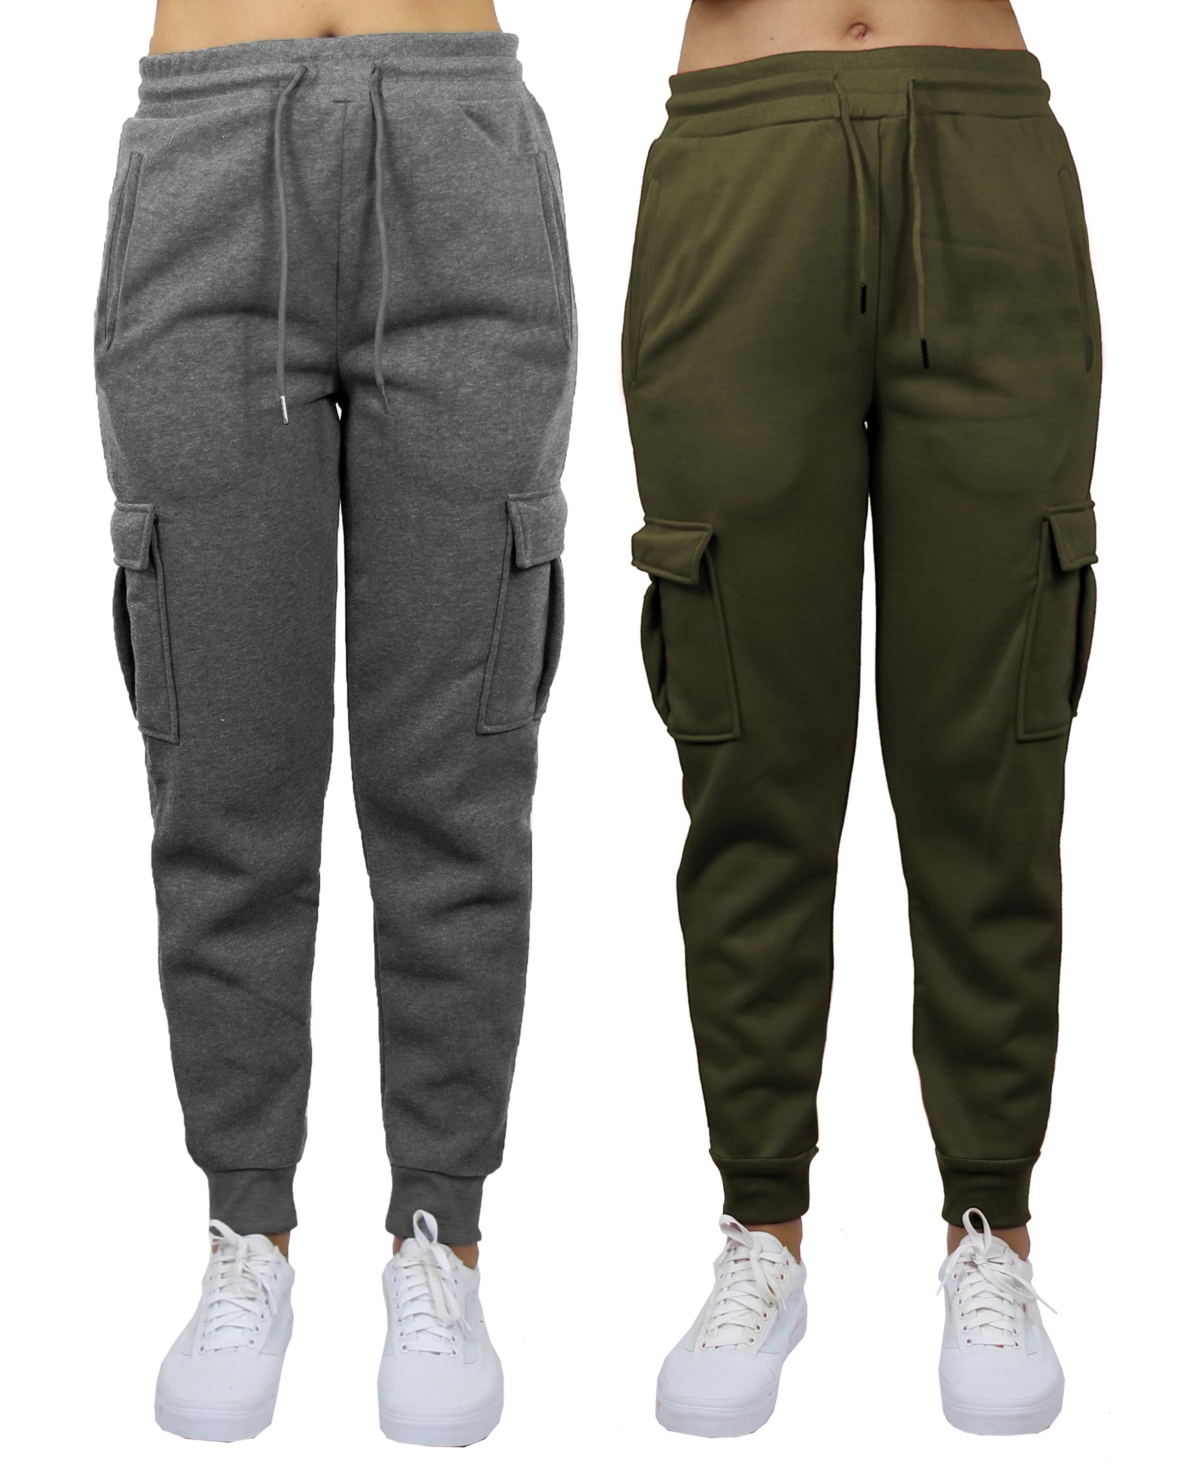 Shop Galaxy By Harvic Women's Heavyweight Loose Fit Fleece Lined Cargo Jogger Pants Set, 2 Pack In Charcoal,olive